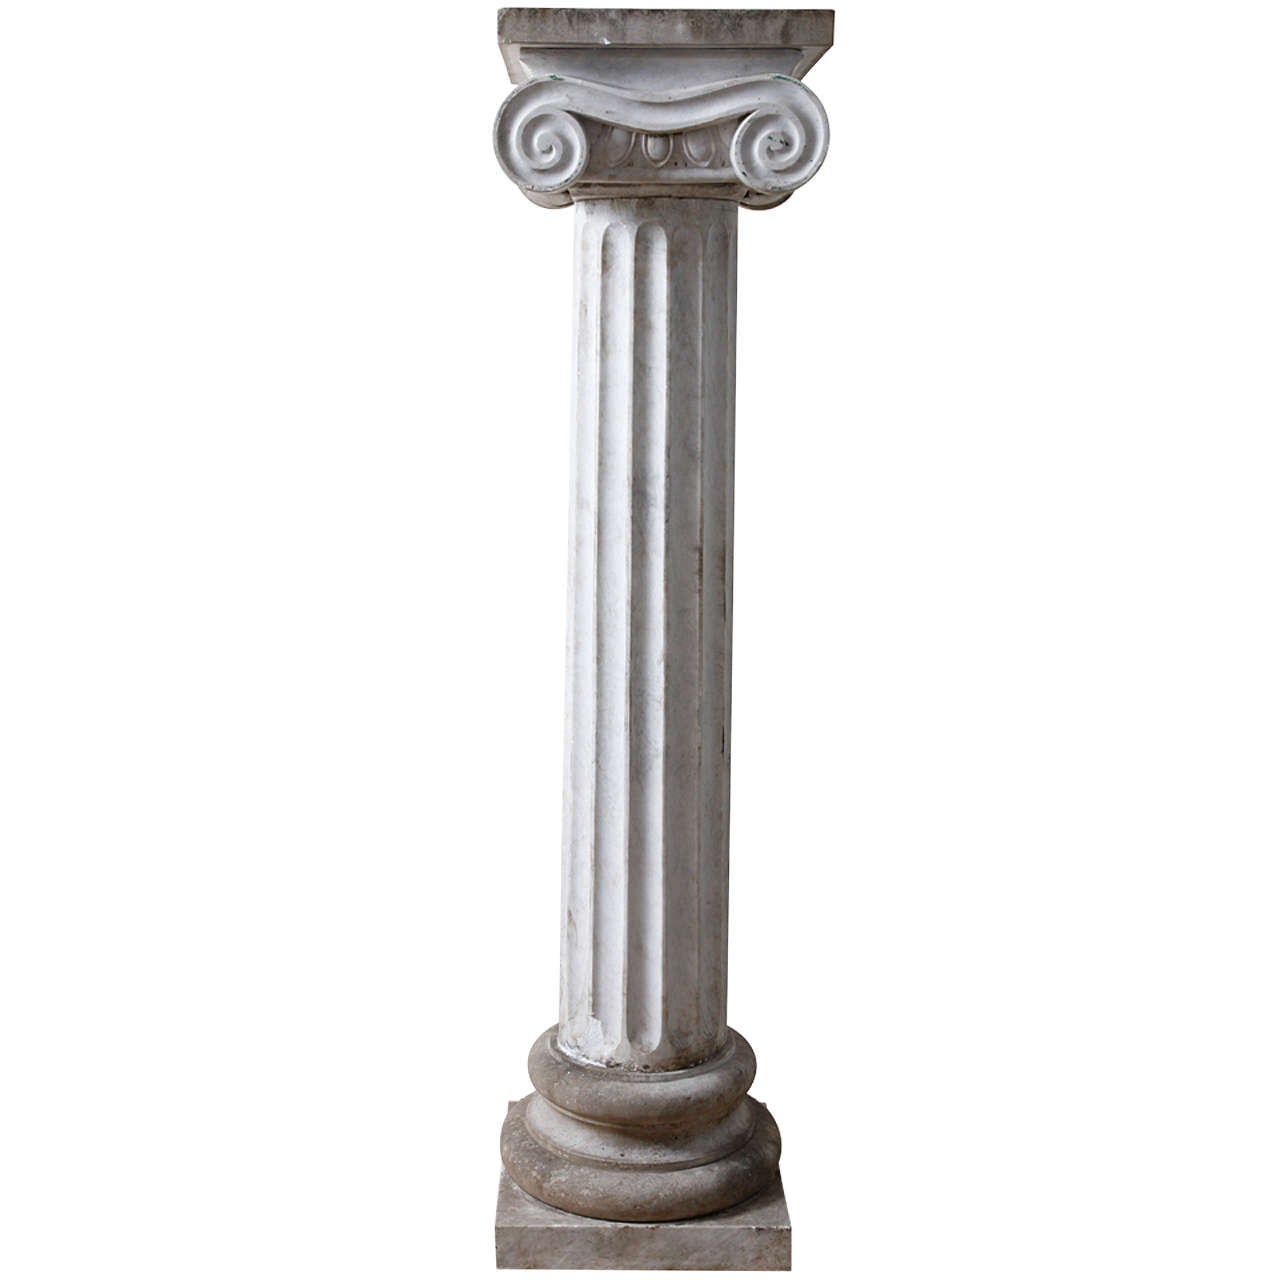 Neoclassical Revival Column Of The Ionic Order For Sale